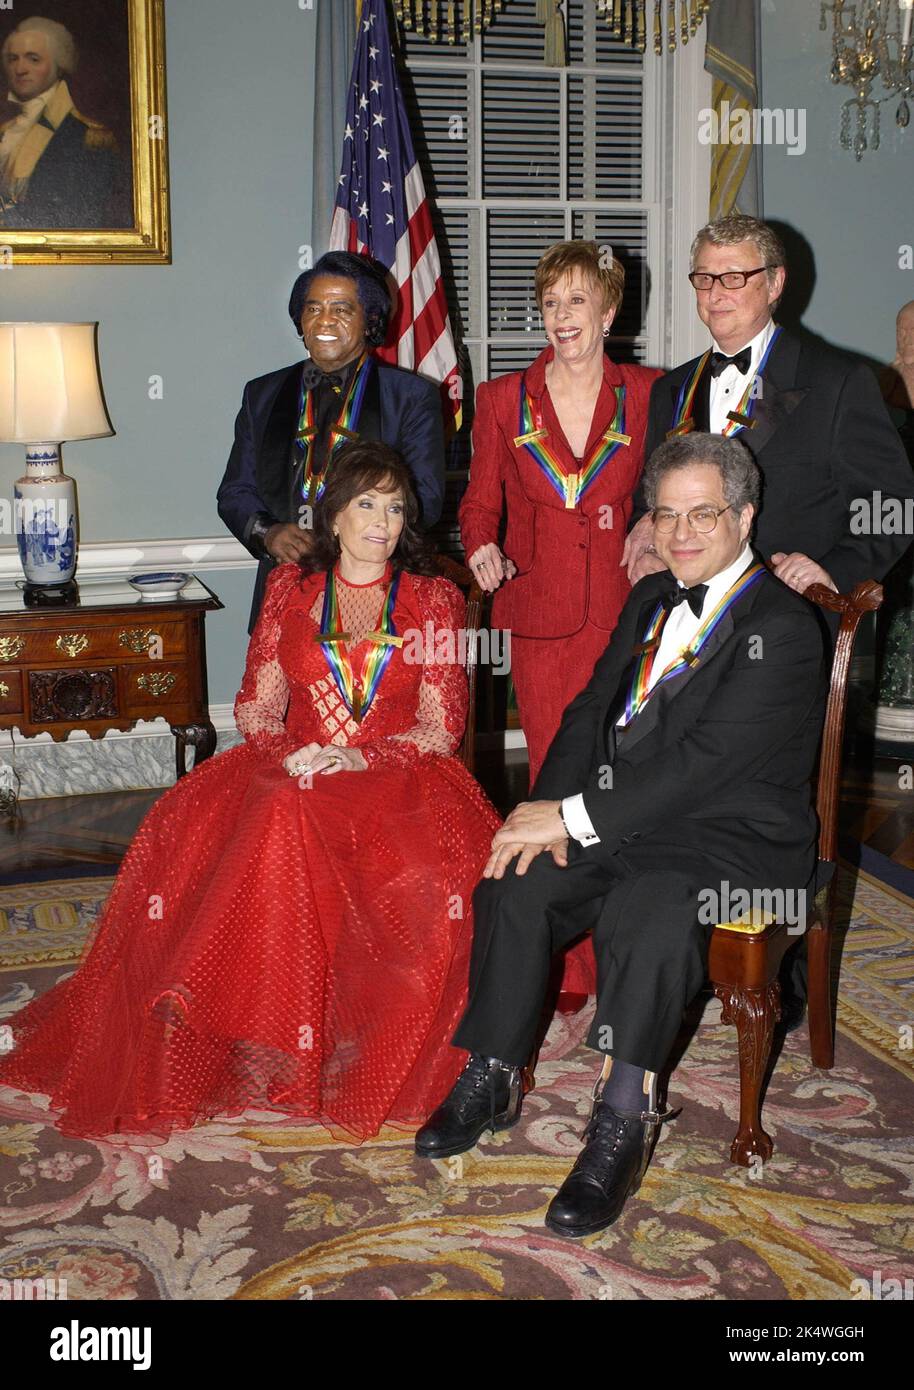 **FILE PHOTO** Loretta Lynn Has Passed Away. It was announced today that famed Director Mike Nichols passed away suddenly on Wednesday, November 20, 2014 at age 83. In this file photo dated December 6, 2003 he is photographed with fellow honorees, clockwise from foreground left, singer Loretta Lynn, singer James Brown, comedian Carol Burnett, director Mike Nichols, and violinist Itzhak Perlman. Credit: Robert Trippett - Pool via CNP /MediaPunch Stock Photo